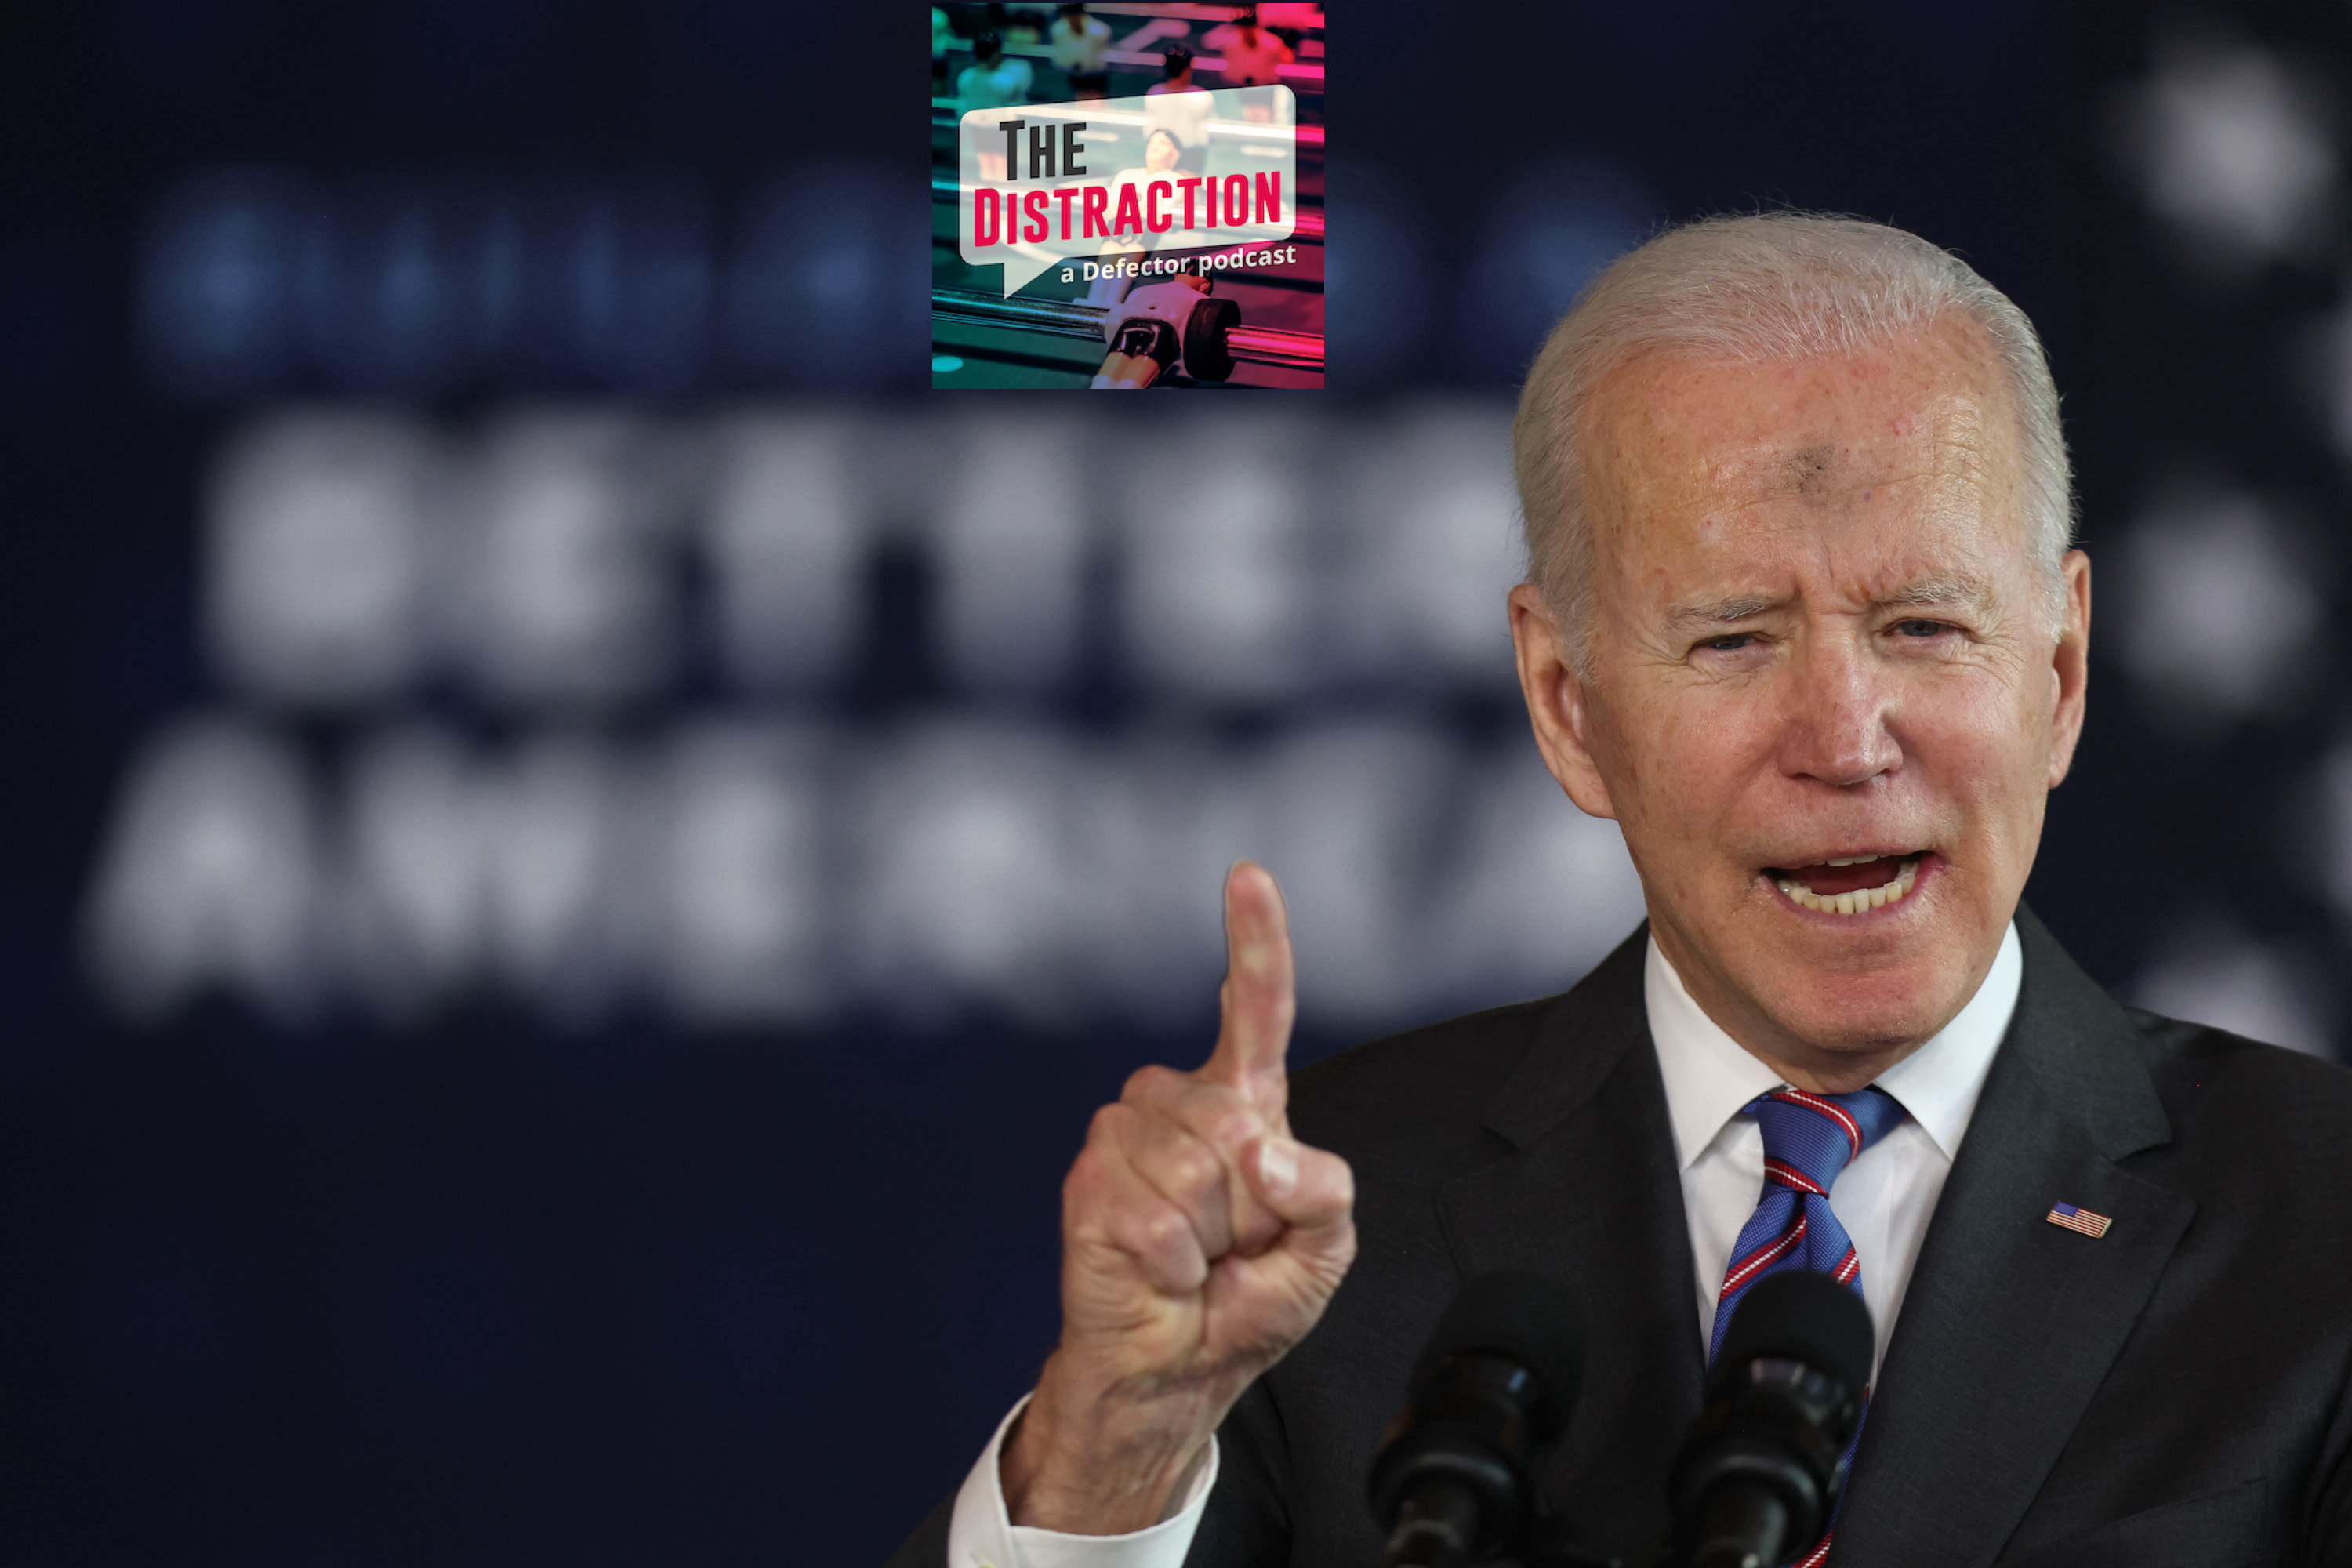 Joe Biden speaks at a rally in Wisconsin, with The Distraction logo in there.